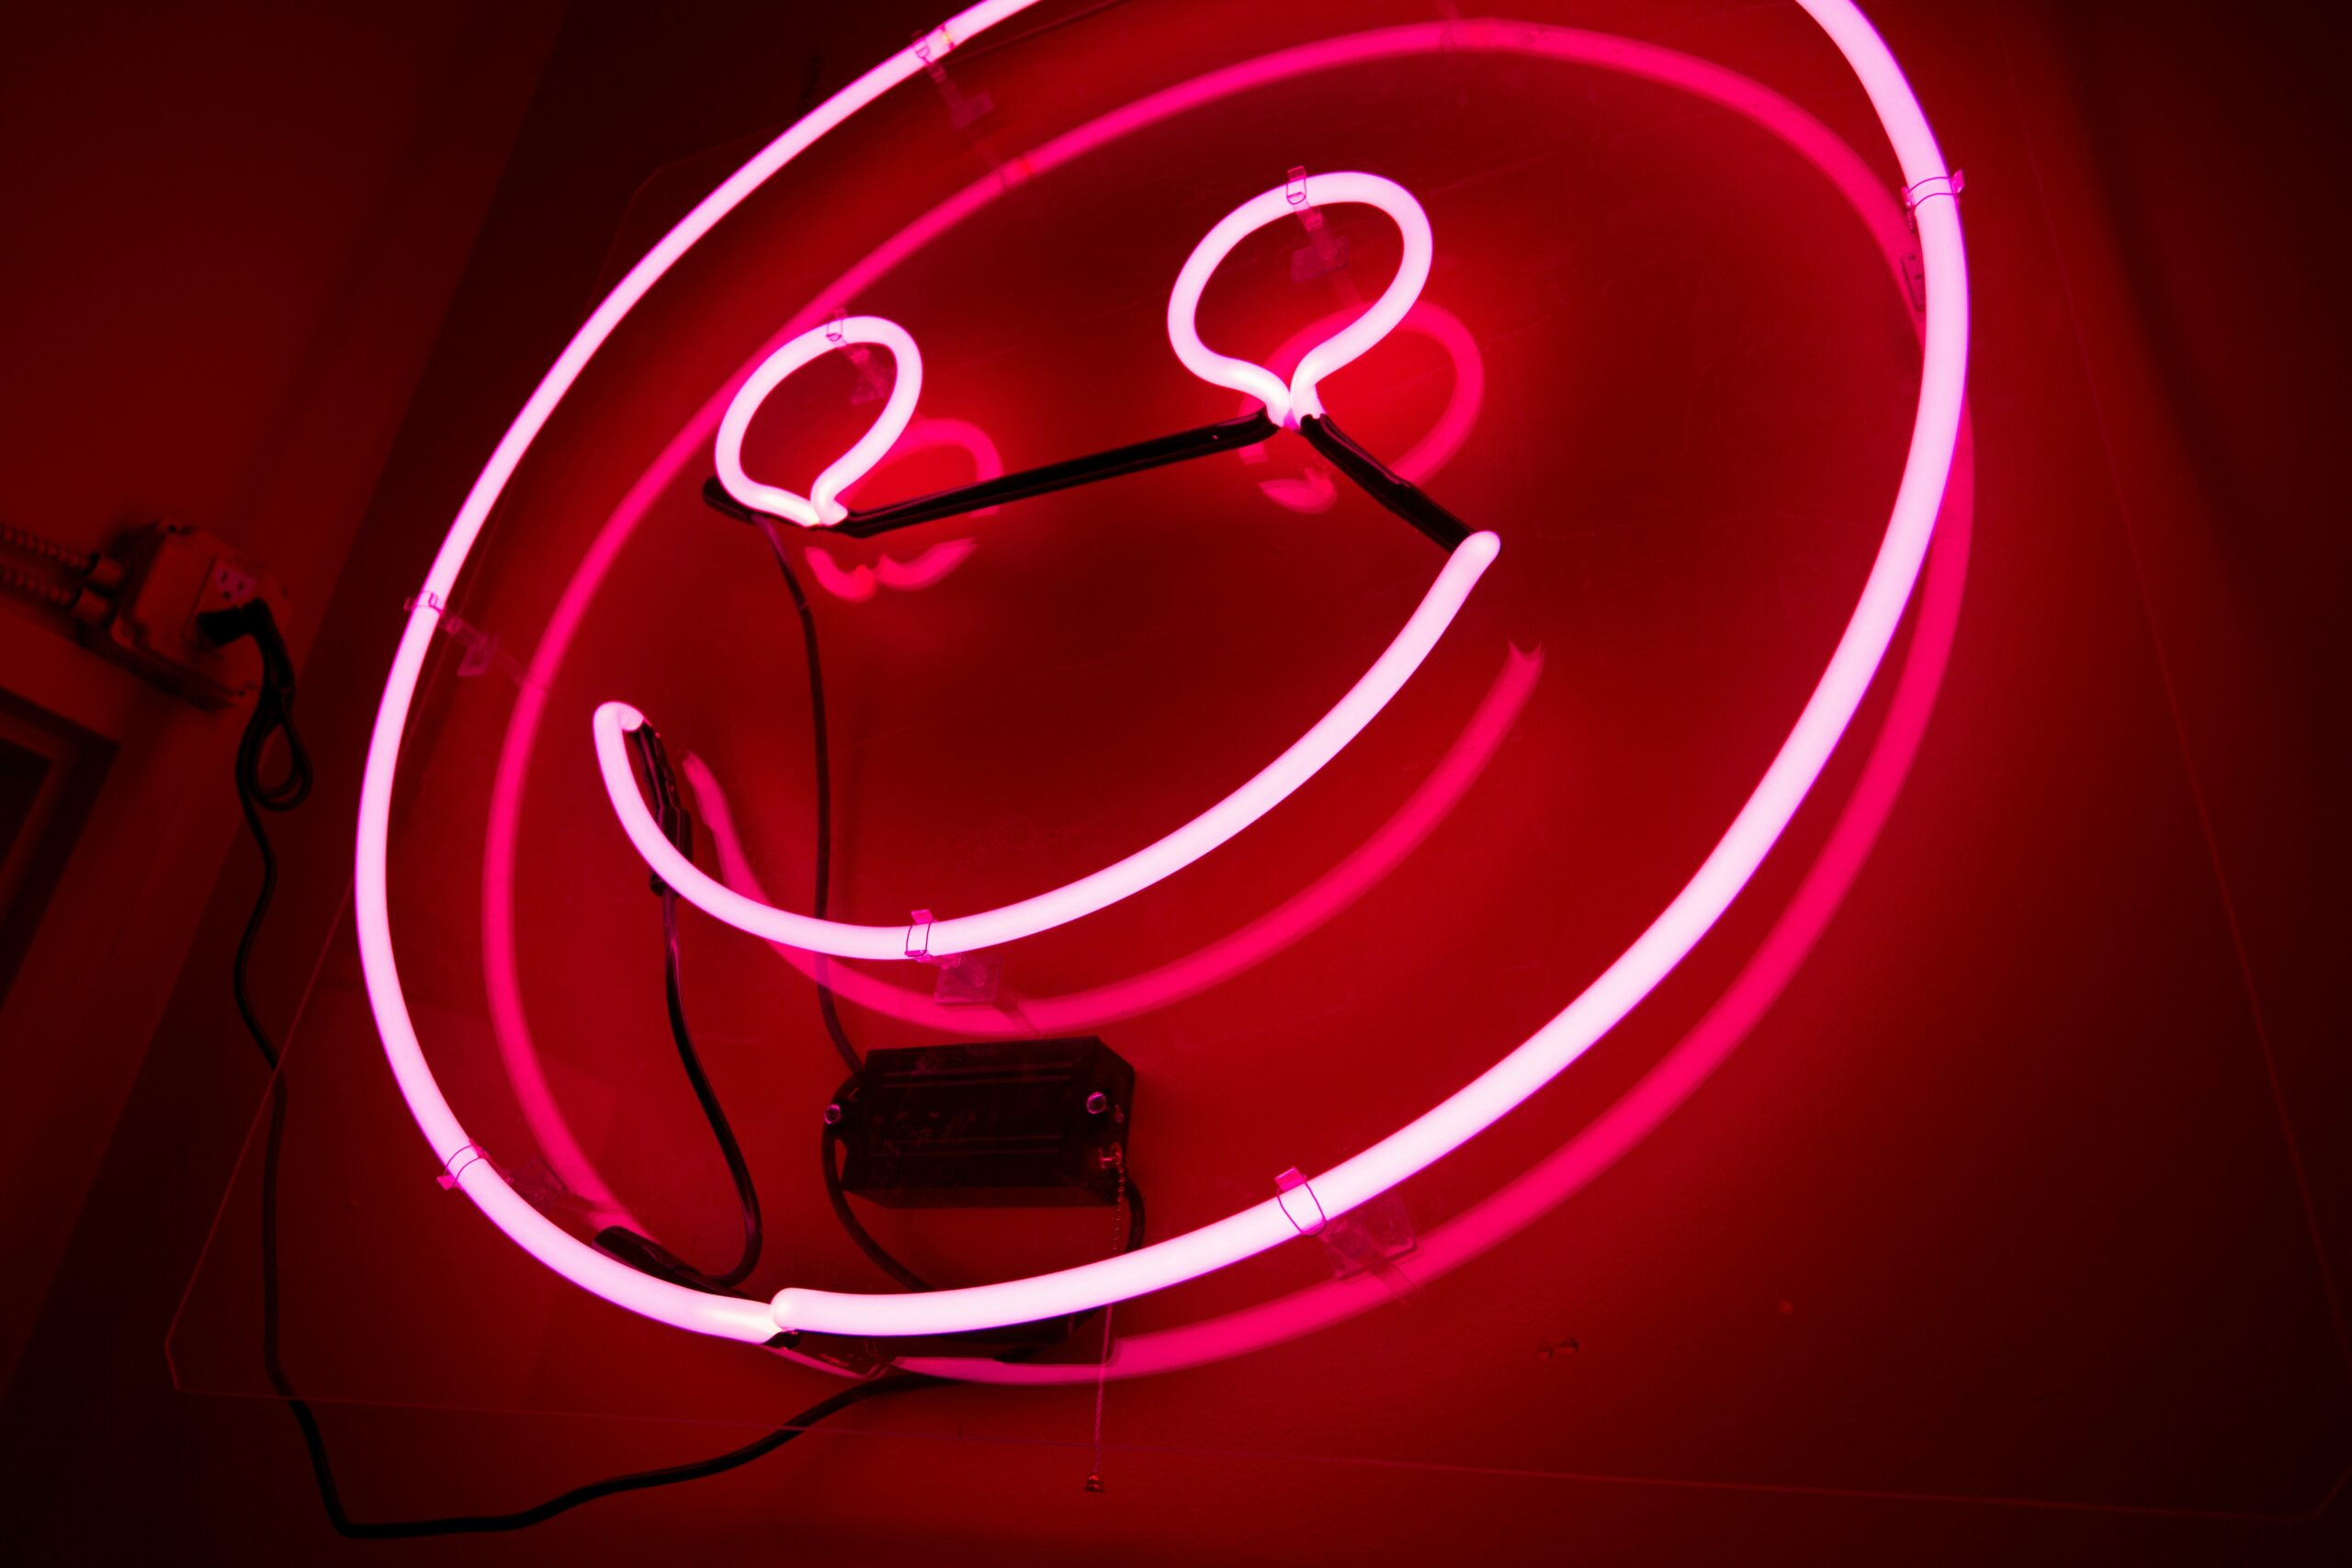 A pink neon sign in the shape of a smiley face